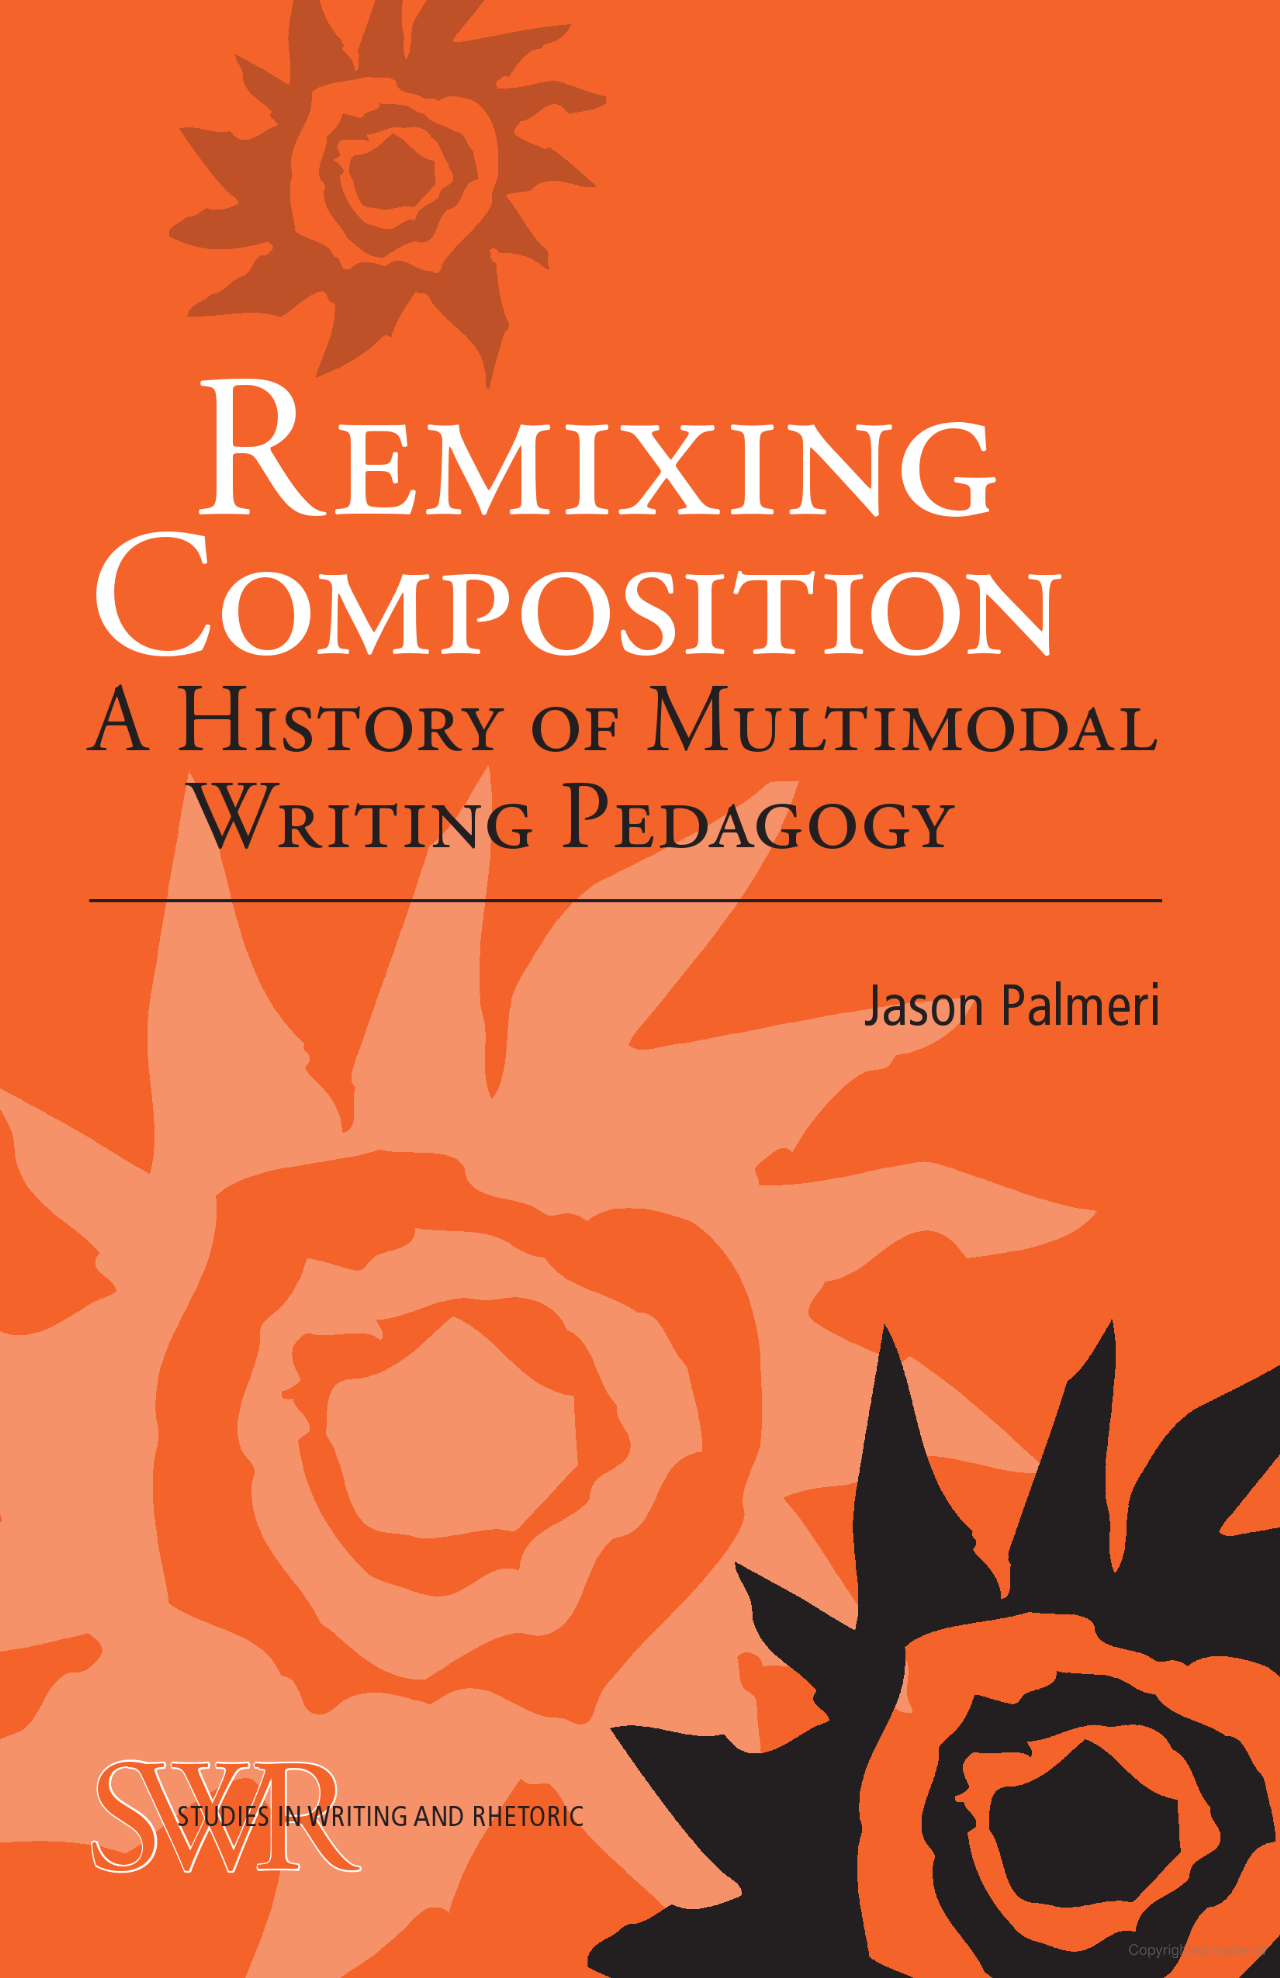 Cover of book titled "Remixing Composition: A History of Multimodal Writing Pedagogy" by Jason Palmeri